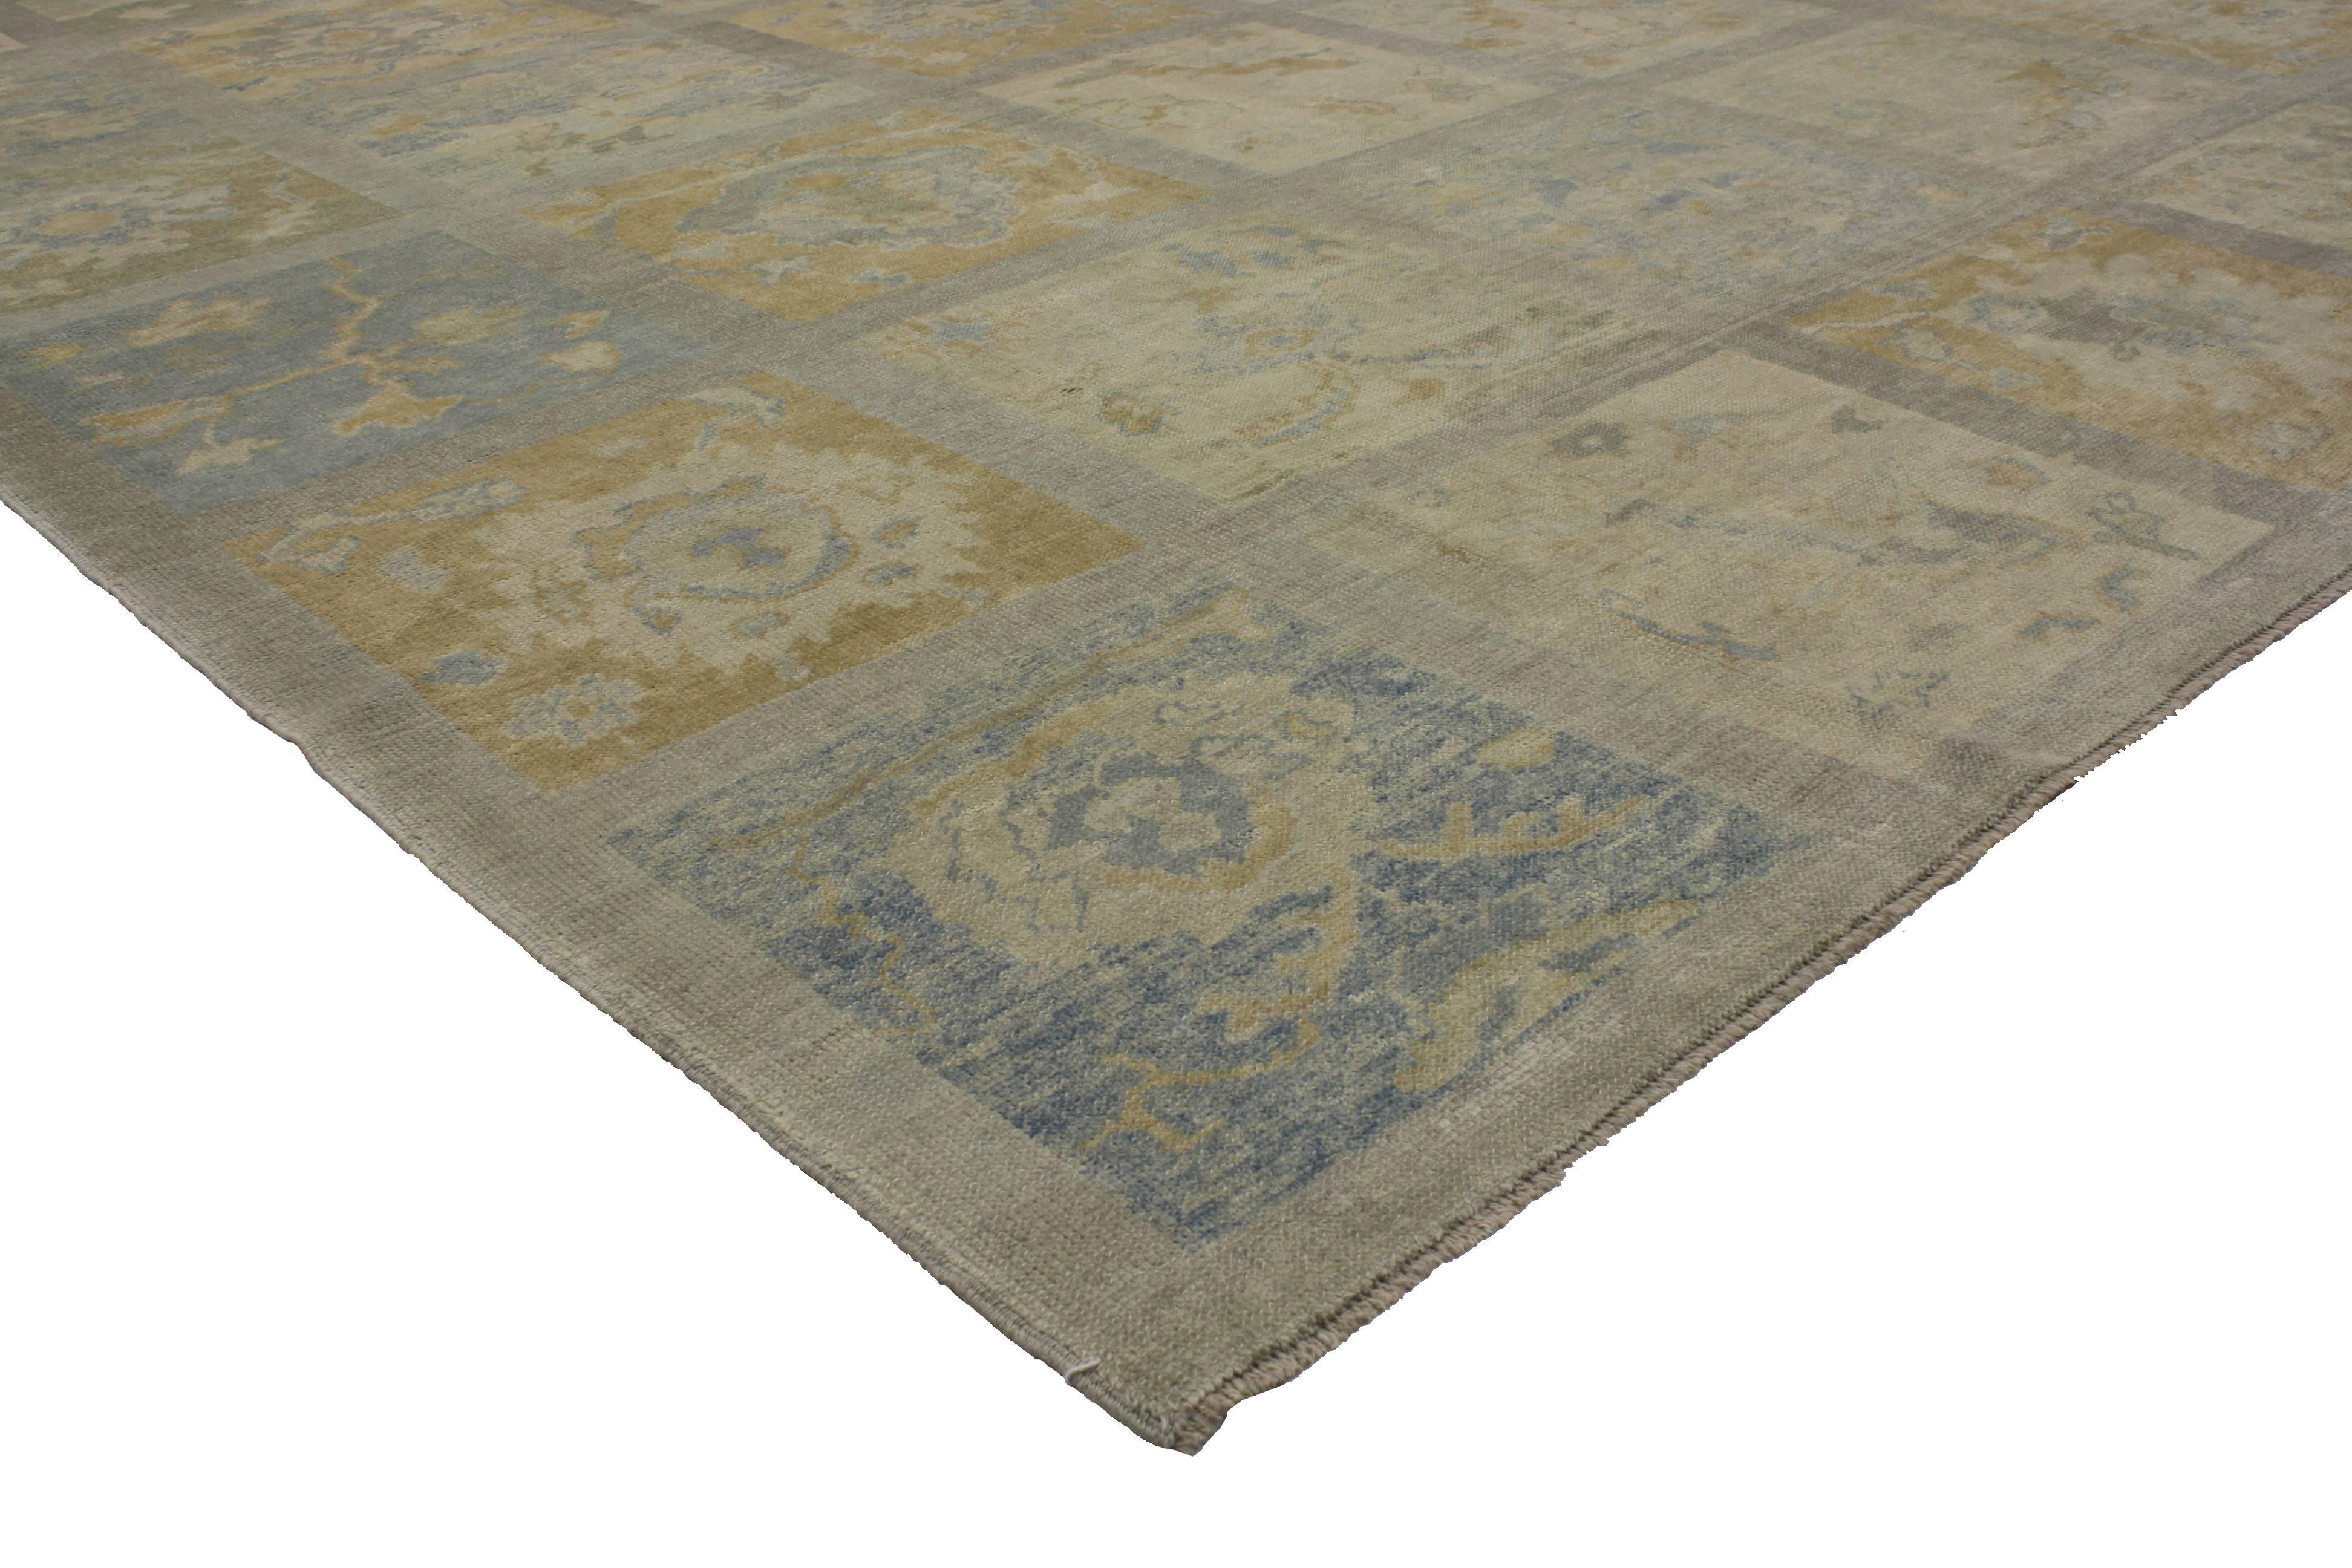 Coastal colors integrated with an intimate patina, modern Turkish Oushak rug features a garden design with a transitional style. Classically composed and boasting a truly magnificent panel compartment garden design, this modern Oushak rug reflects